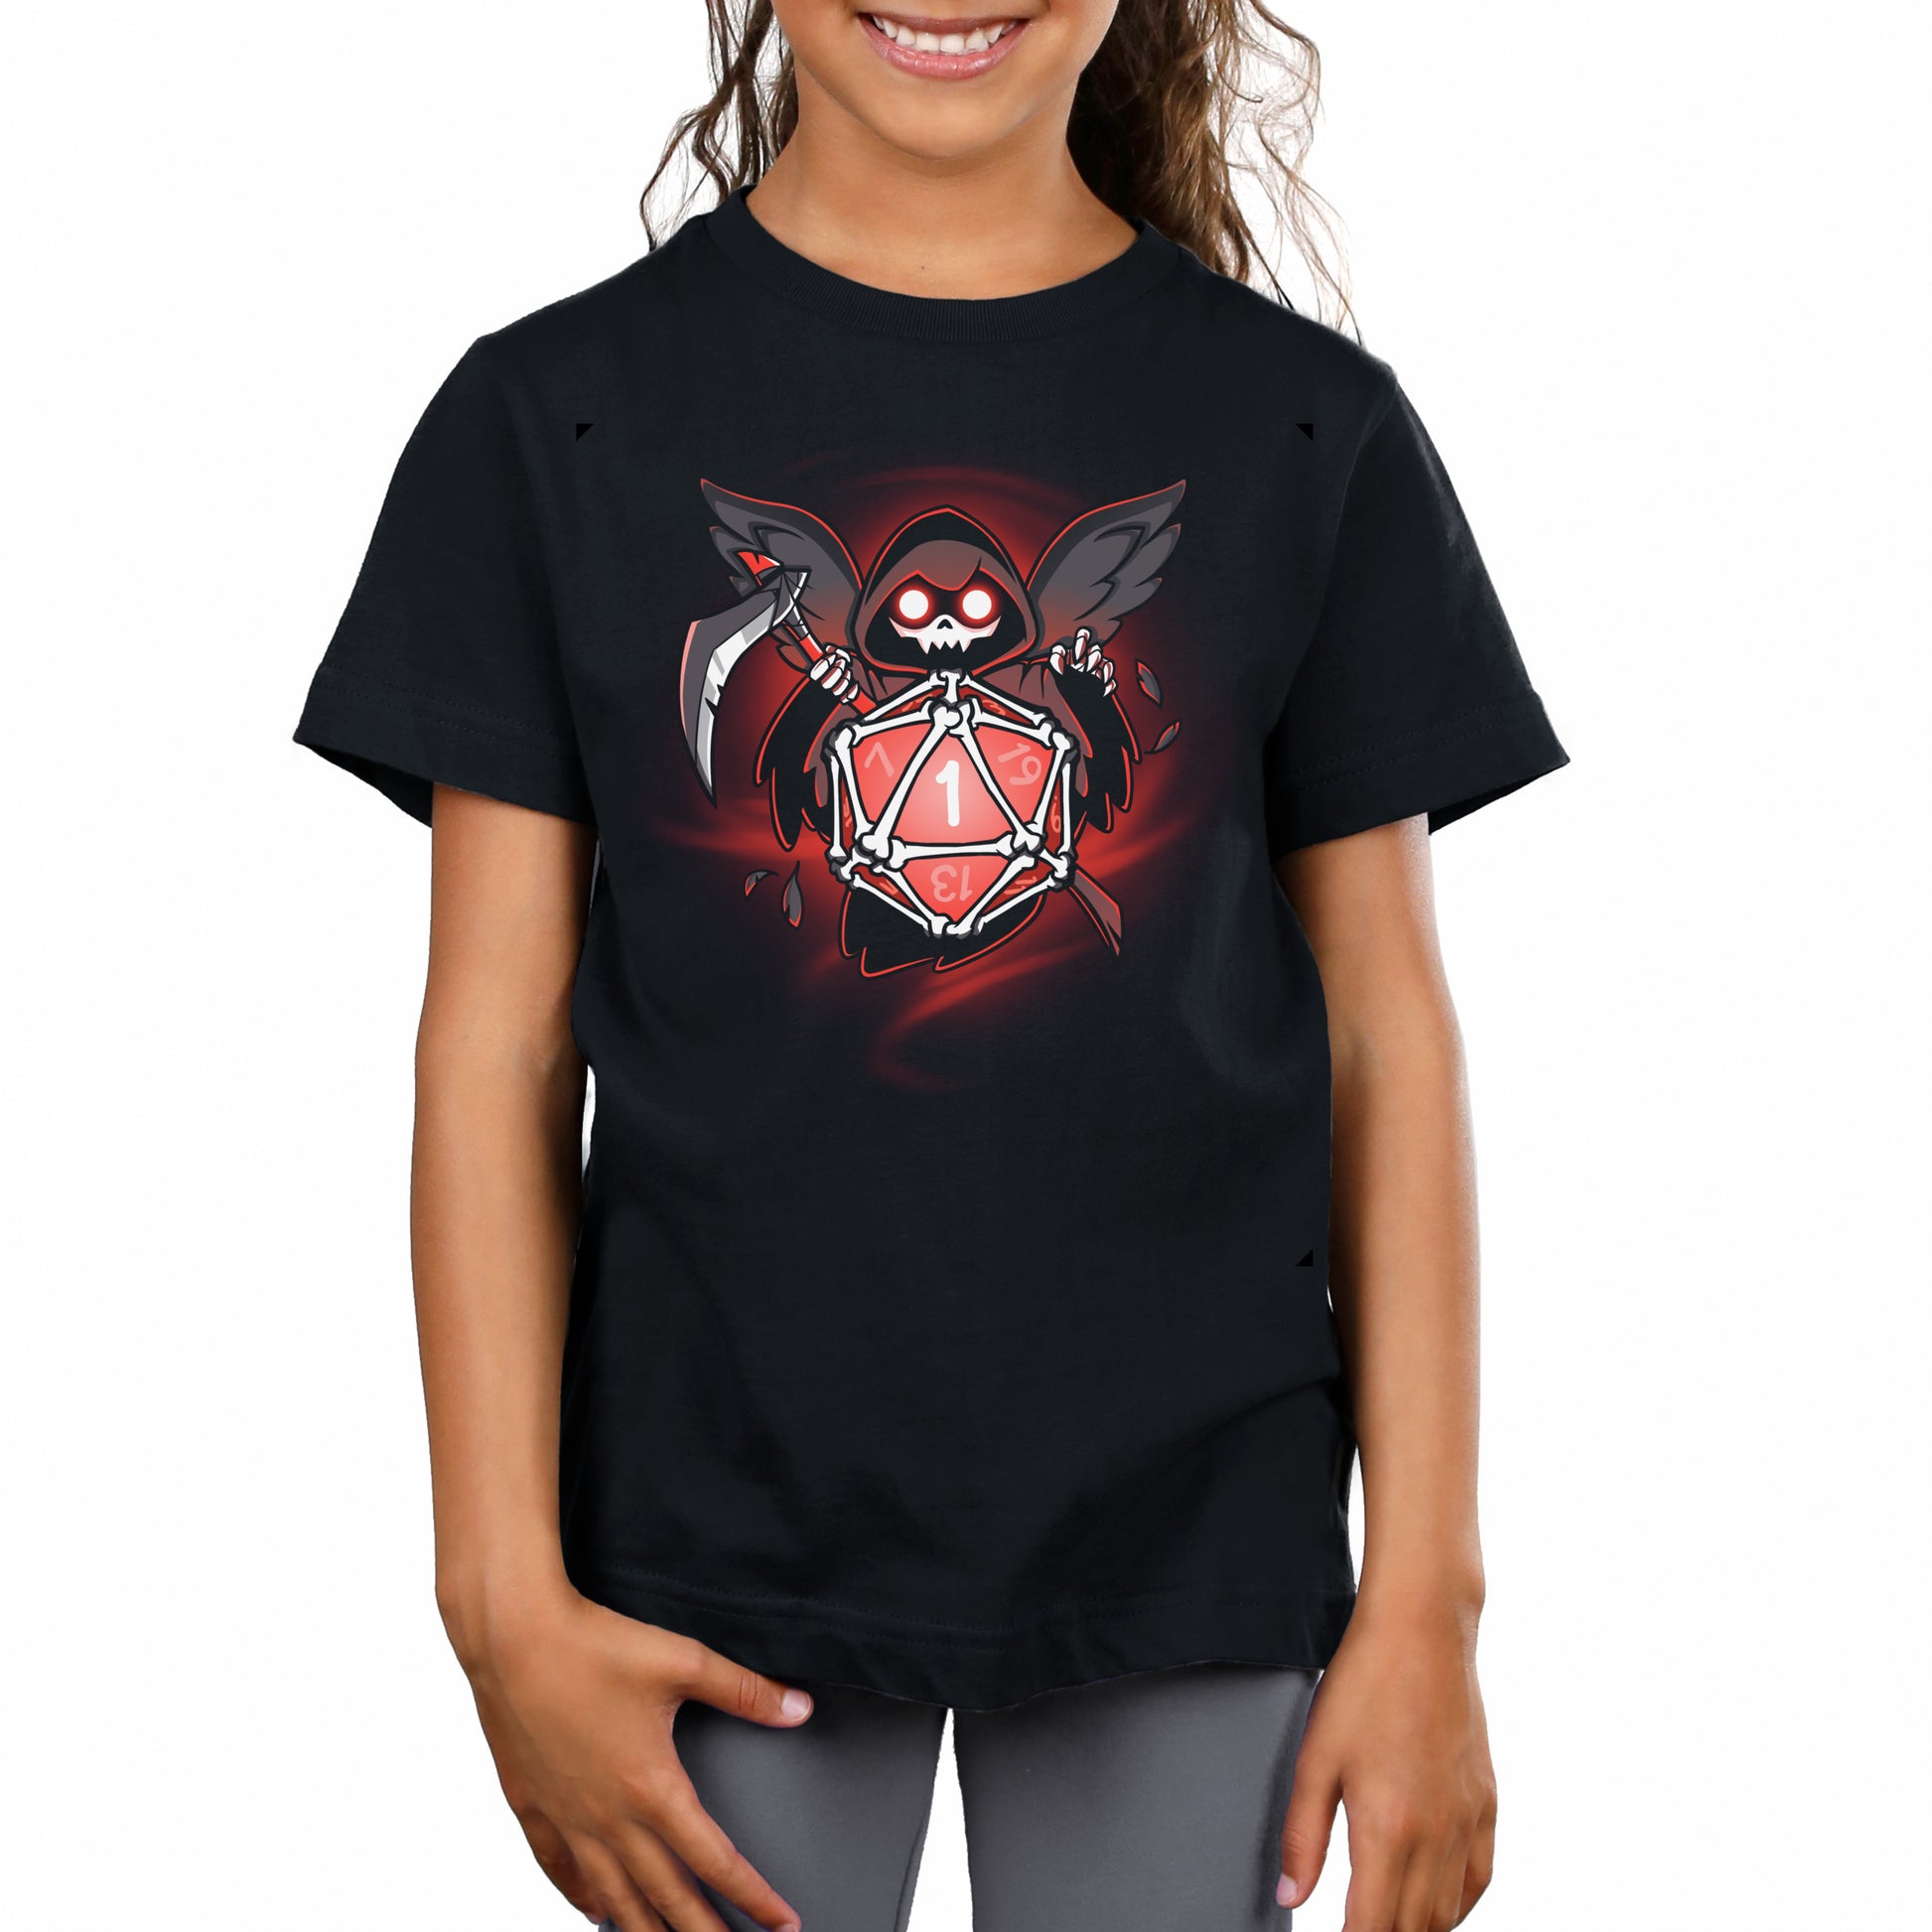 A young person is wearing a black T-shirt made of super soft ringspun cotton, featuring a geometric design titled "Grim Reaper's Roll" by monsterdigital, which depicts a reaper holding a gaming die marked with the number one ("critical fail").